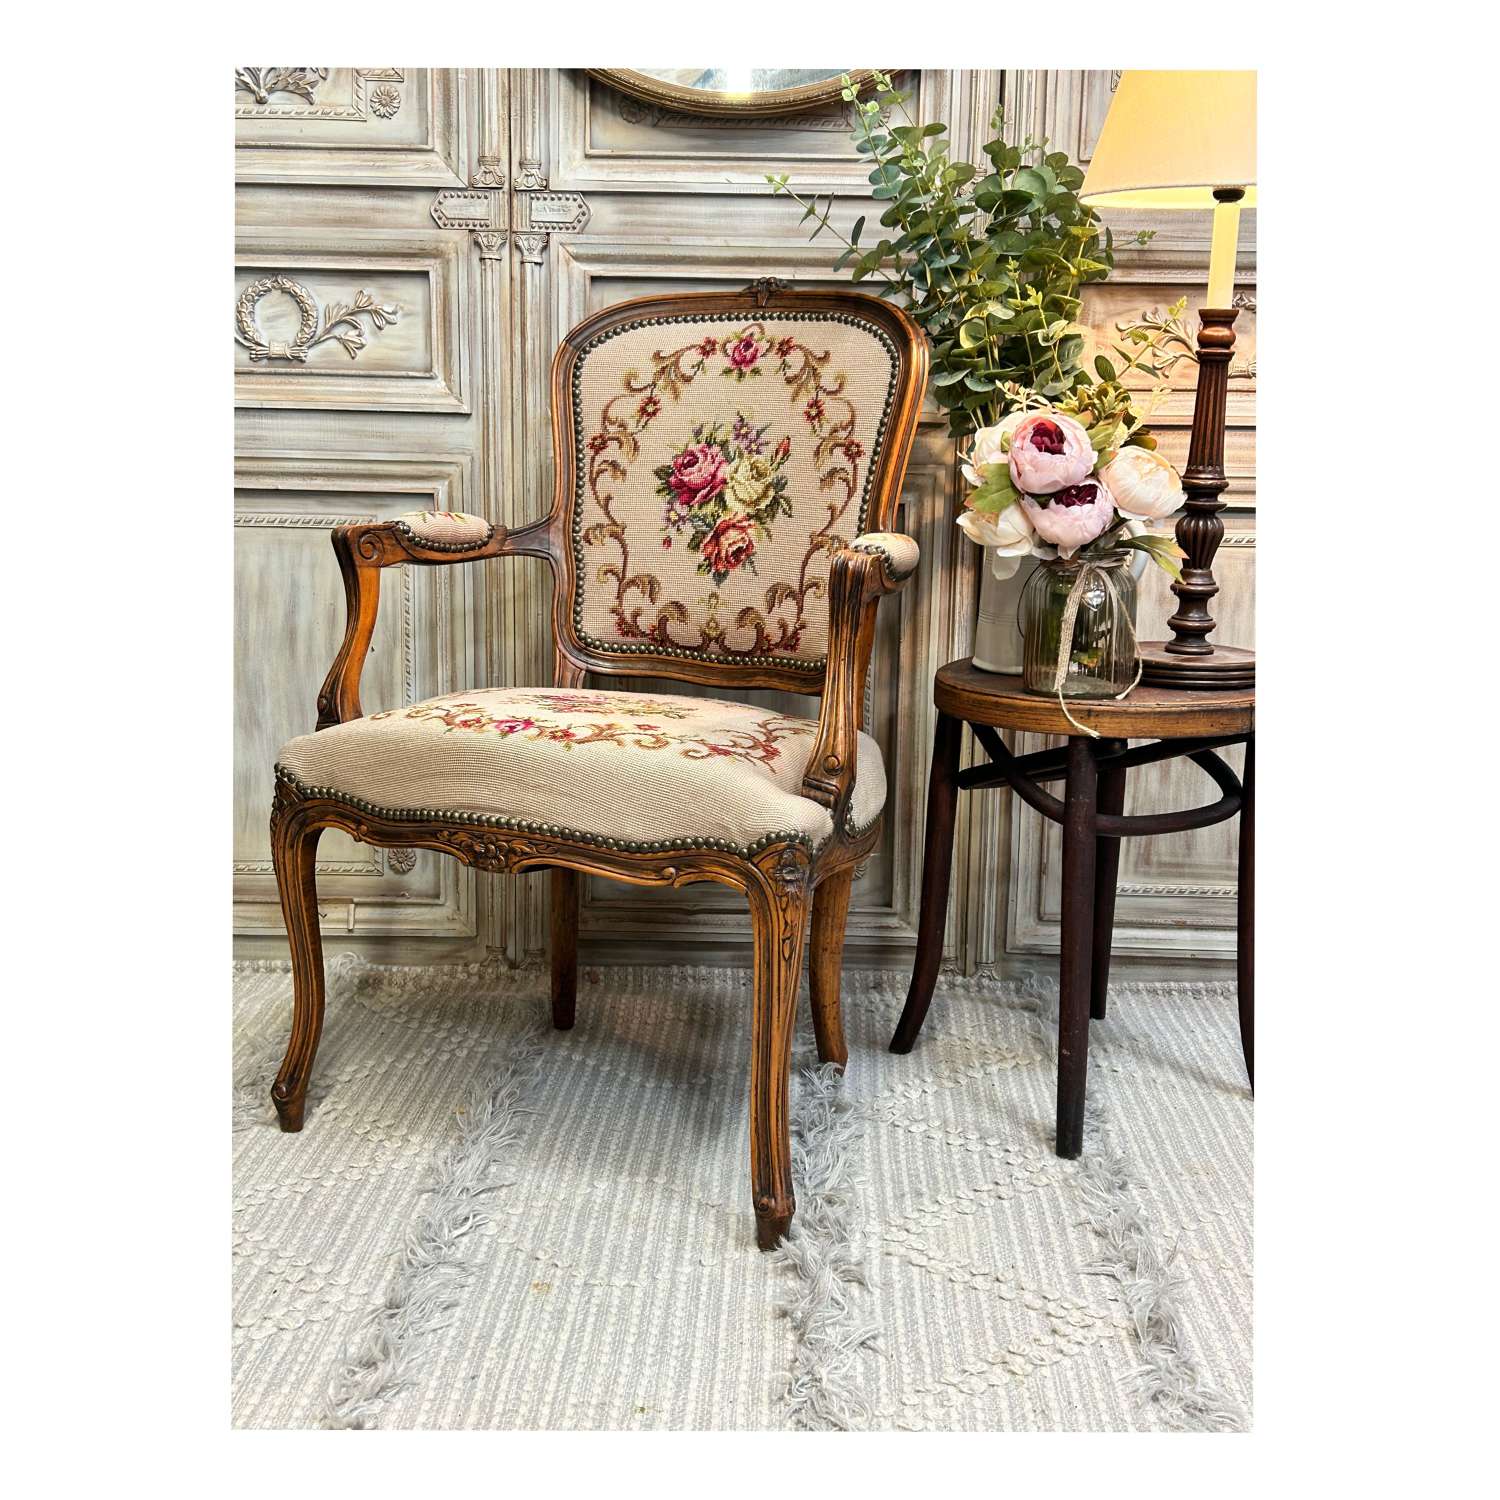 Vintage French tapestry chair with carved frame.